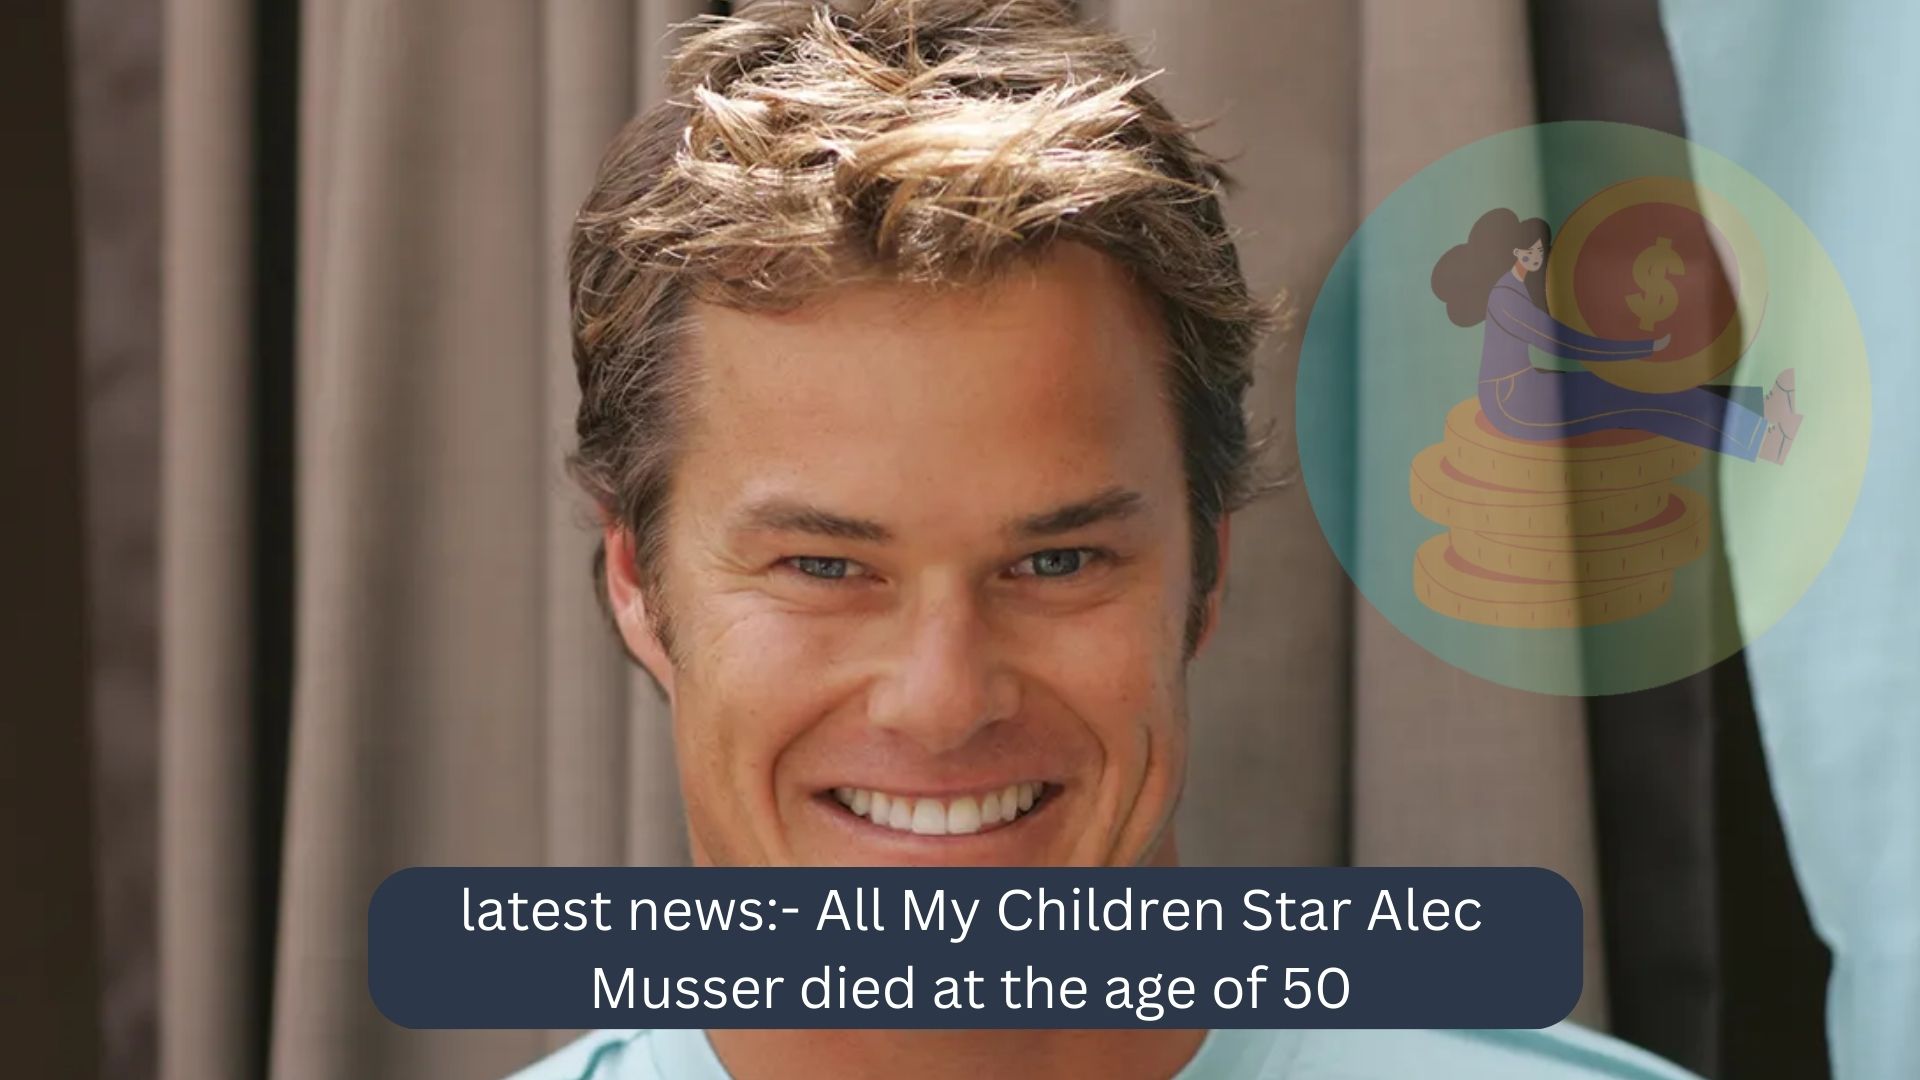 _Latest news -Star Alec Musser died at the age of 50